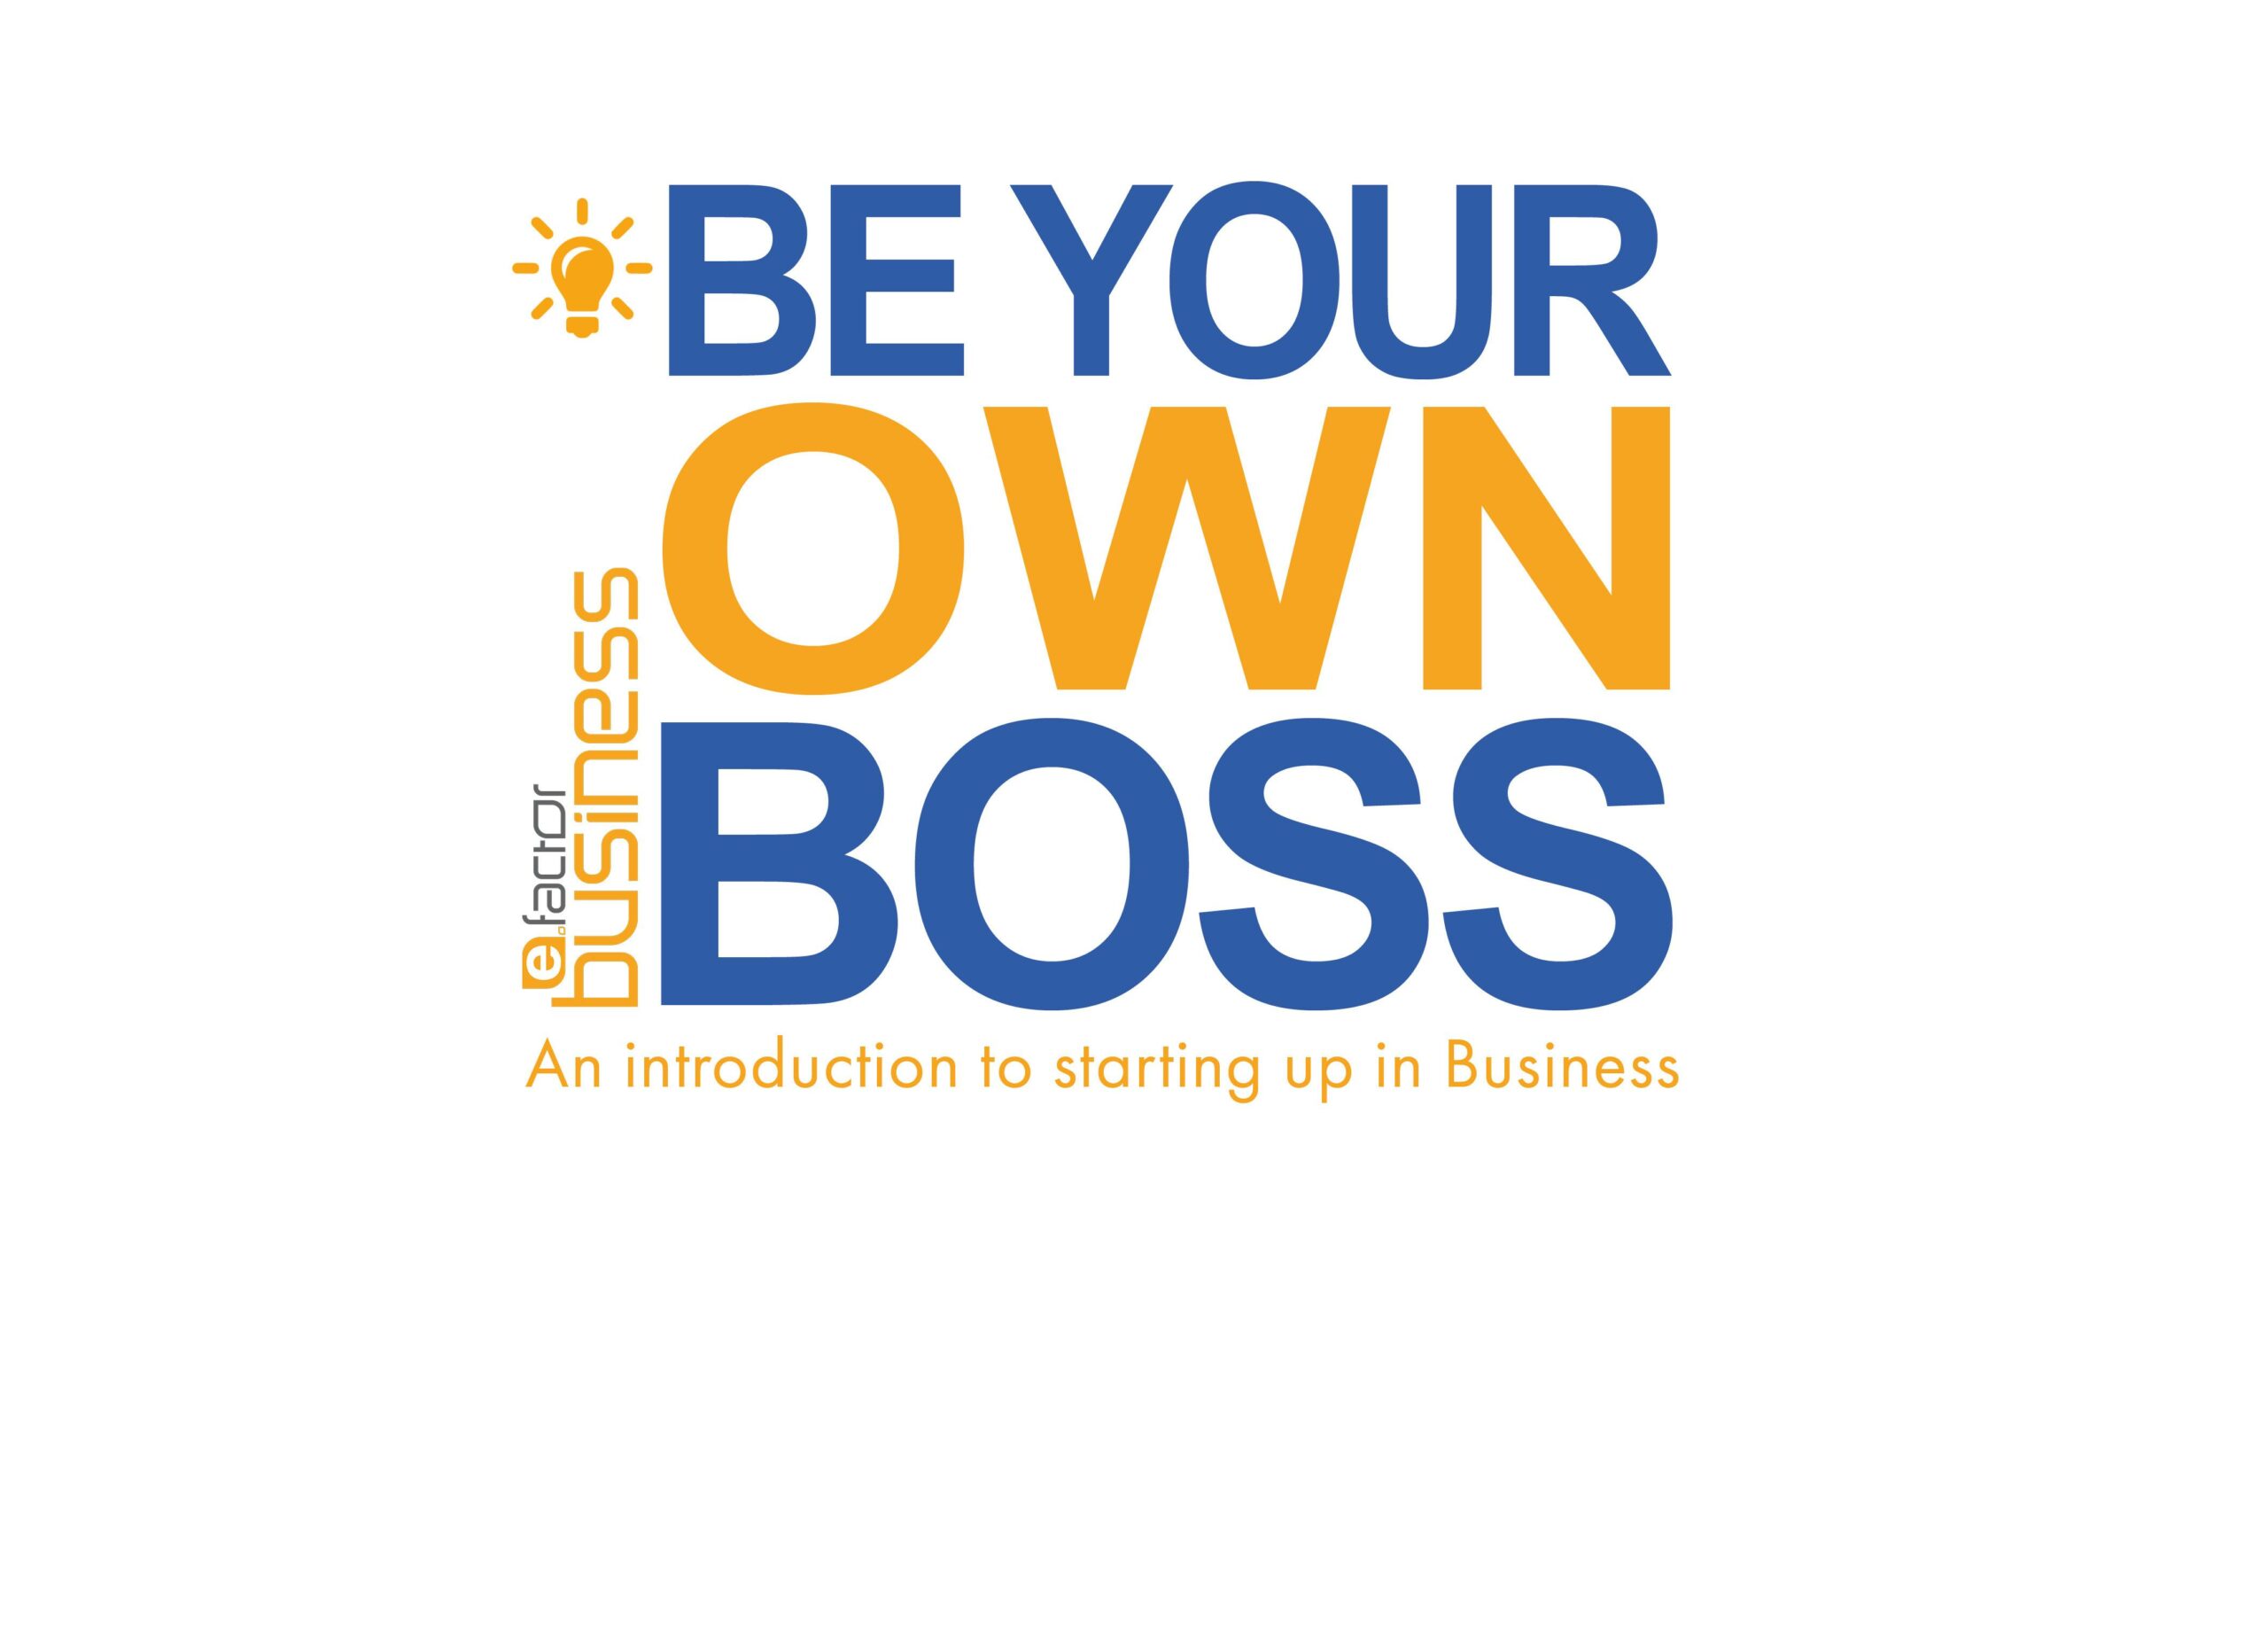 Join our January workshop and learn how to be your own boss by starting up your own business.